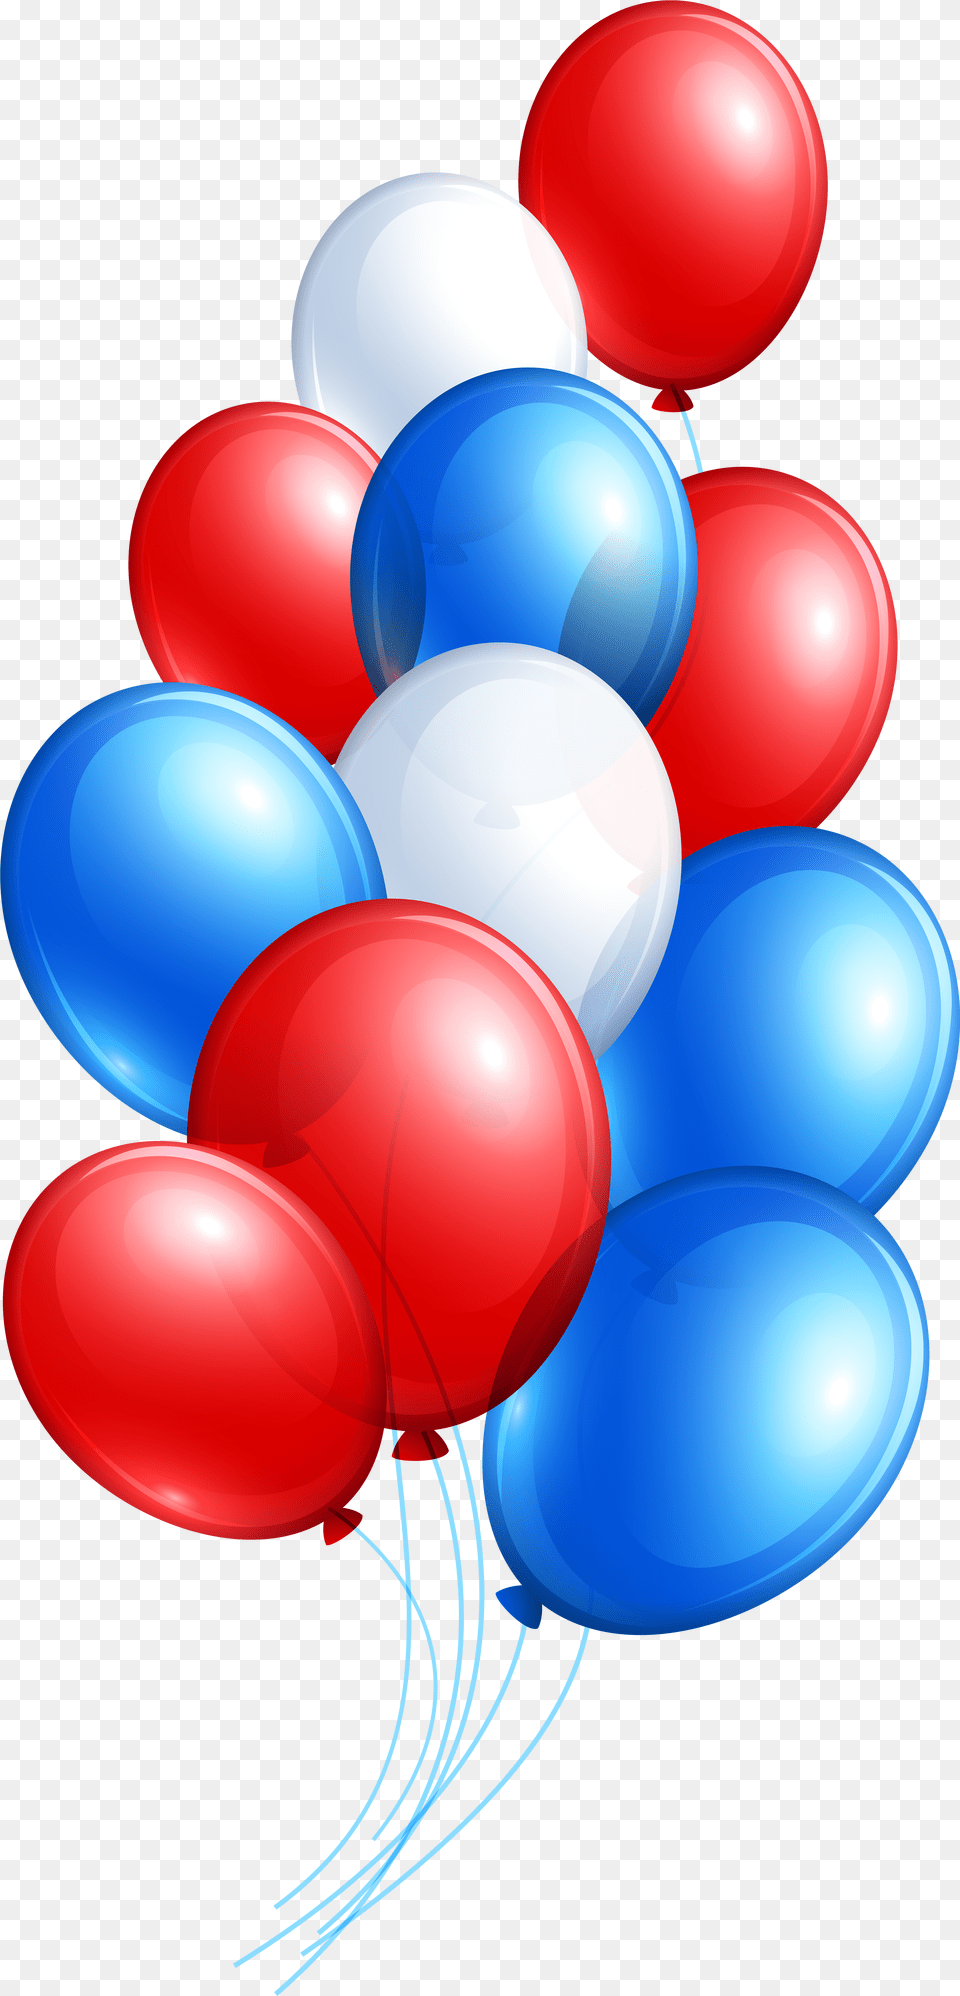 Red And Blue Balloons Png Image